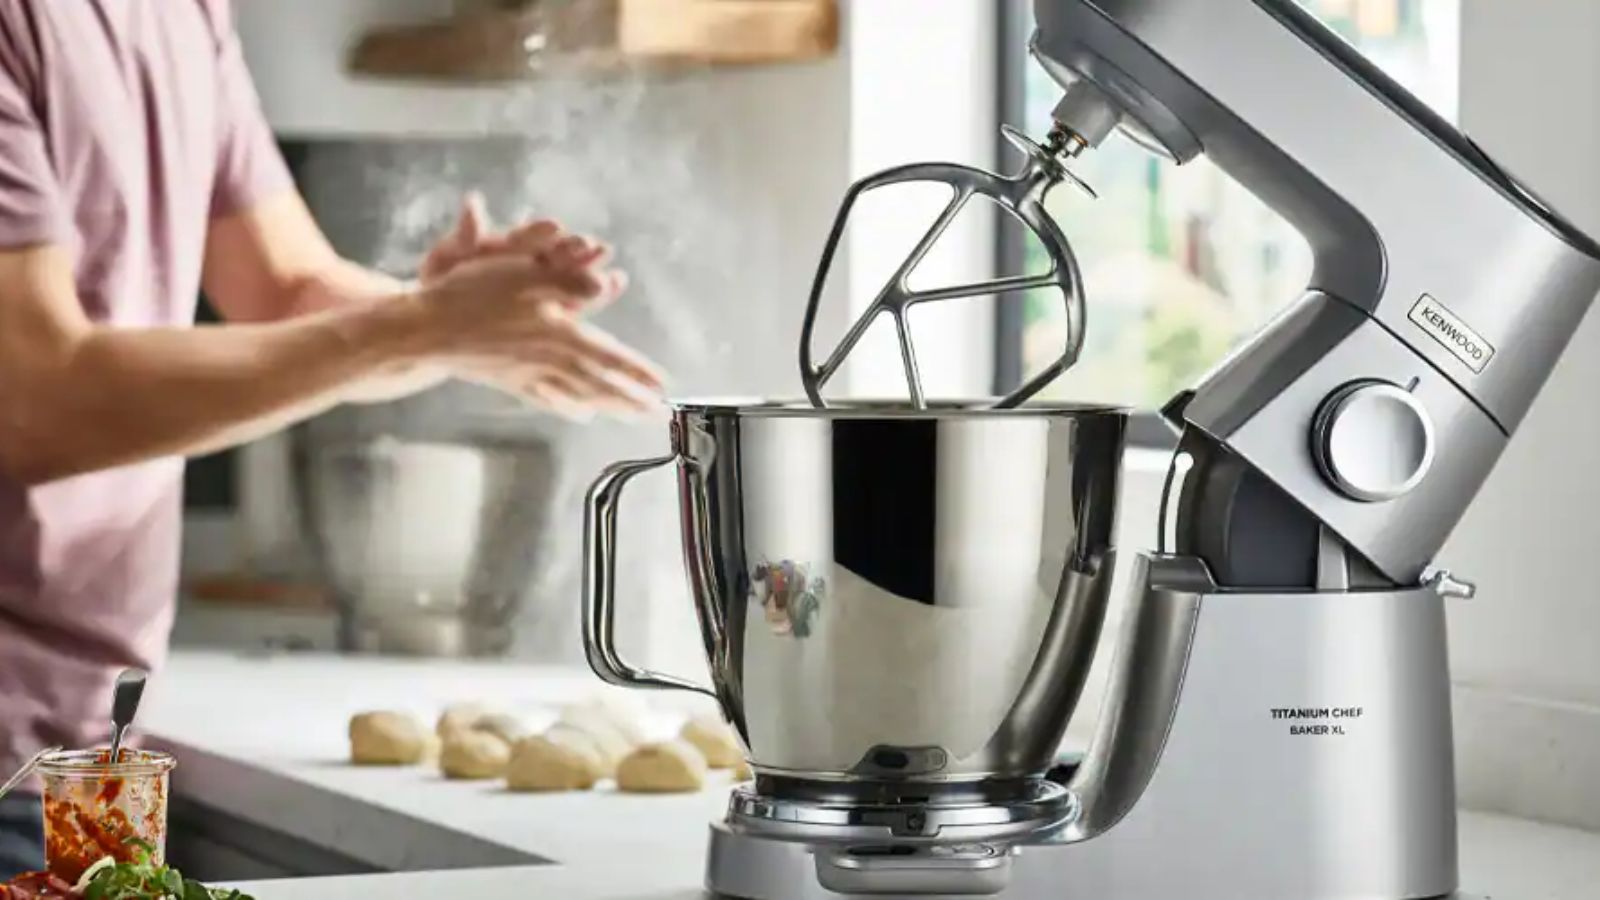 Kenwood KVL4100S Chef XL Stand Mixer for sale online